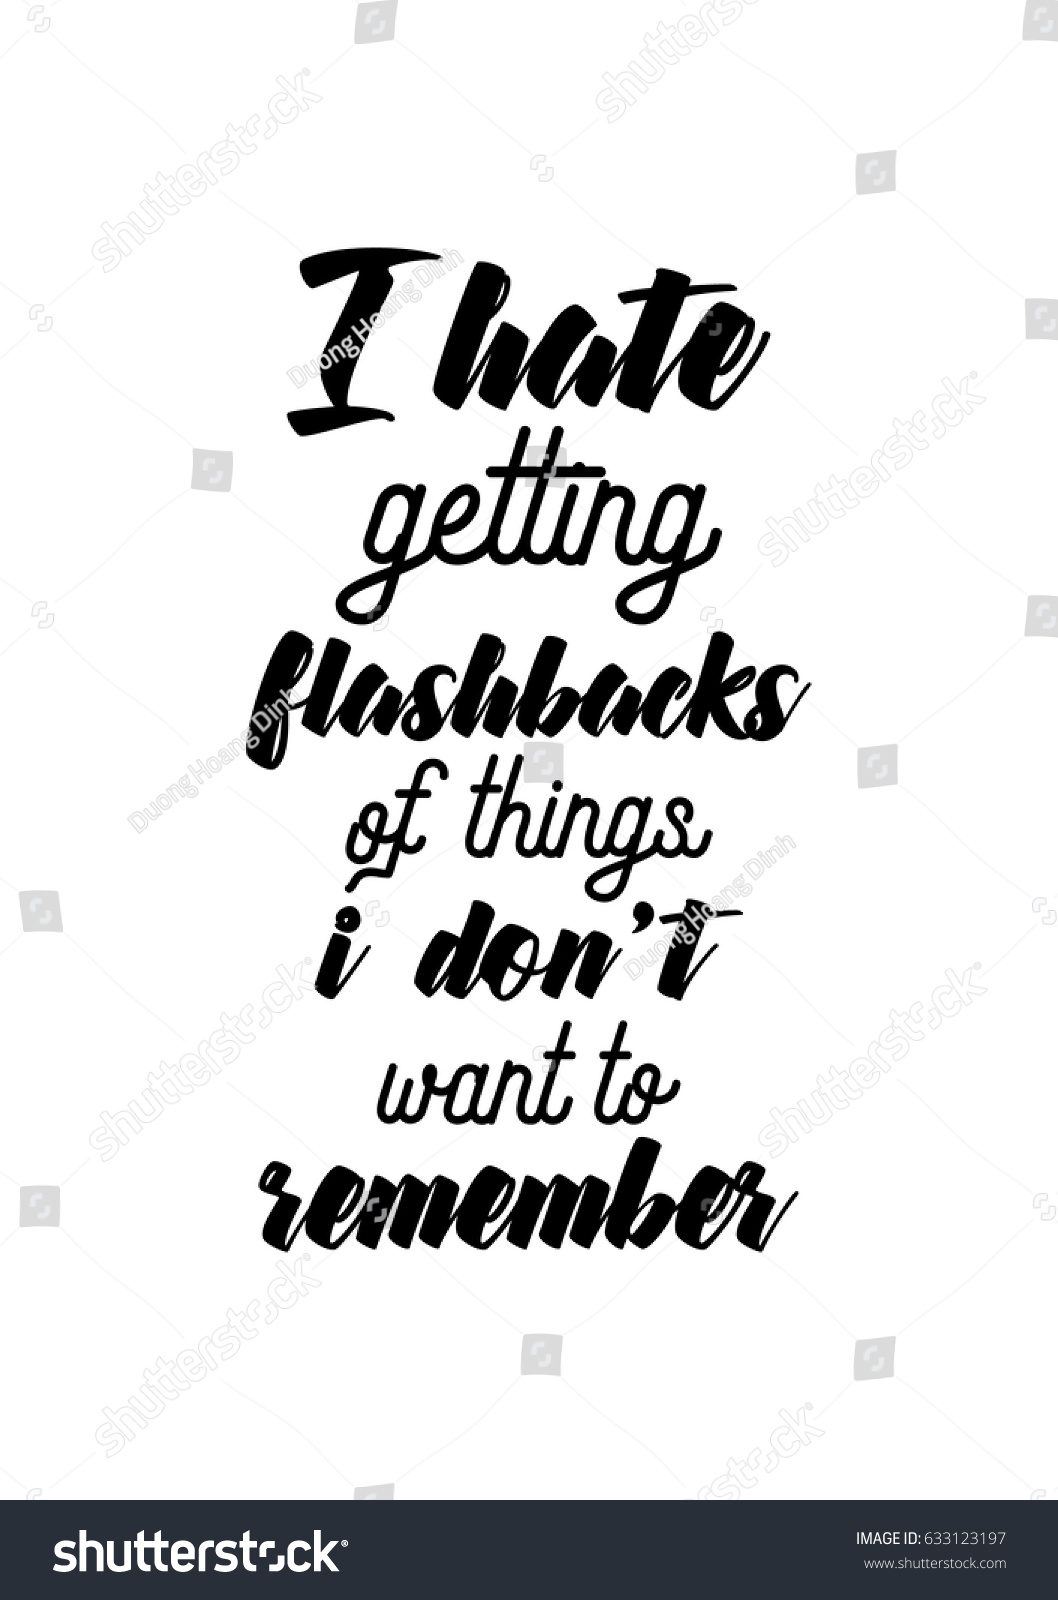 Lettering quotes motivation about life quote Calligraphy Inspirational quote I hate ting flashbacks of